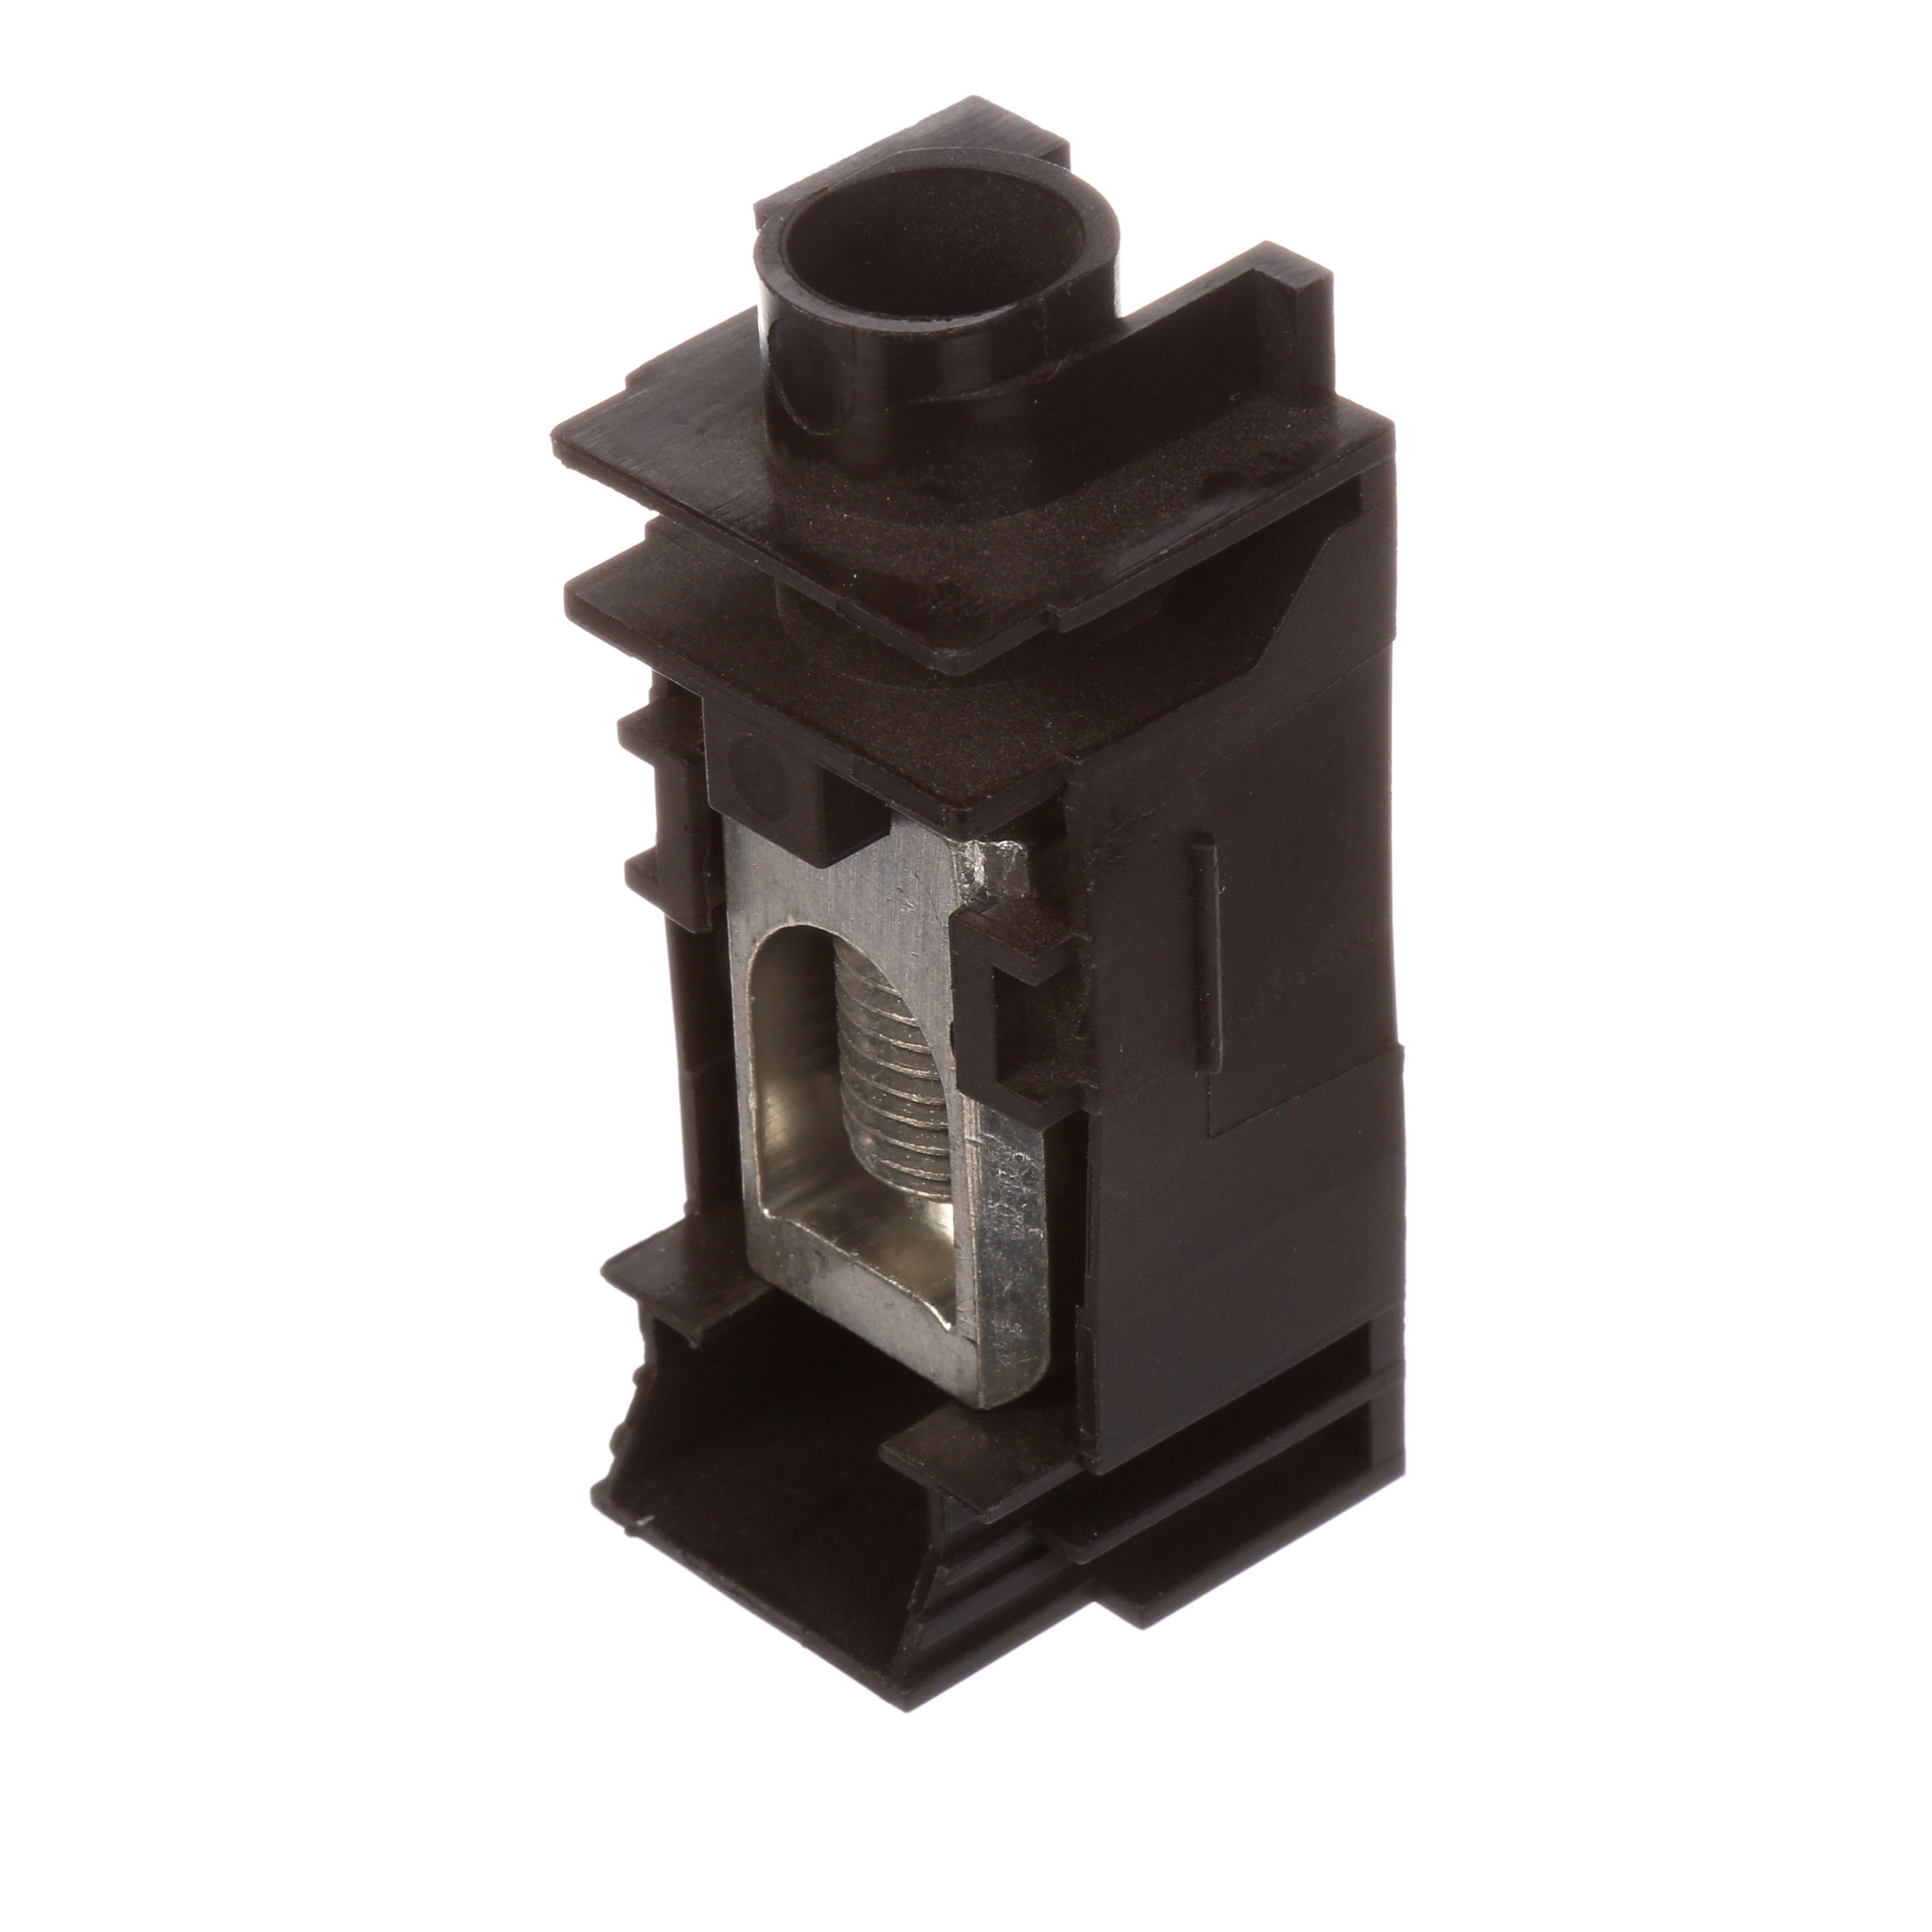 SIEMENS VL UL RATED CIRCUIT BREAKER ACCESSORY. ALUMINUM BODY LUG FOR 30A - 150ADG FRAME BREAKER. WIRE RANGE 6 - 3/0 AWS (CU/AL) - 1 BARREL LUG. SUITABLE FOR LINE AND LOAD SIDES.